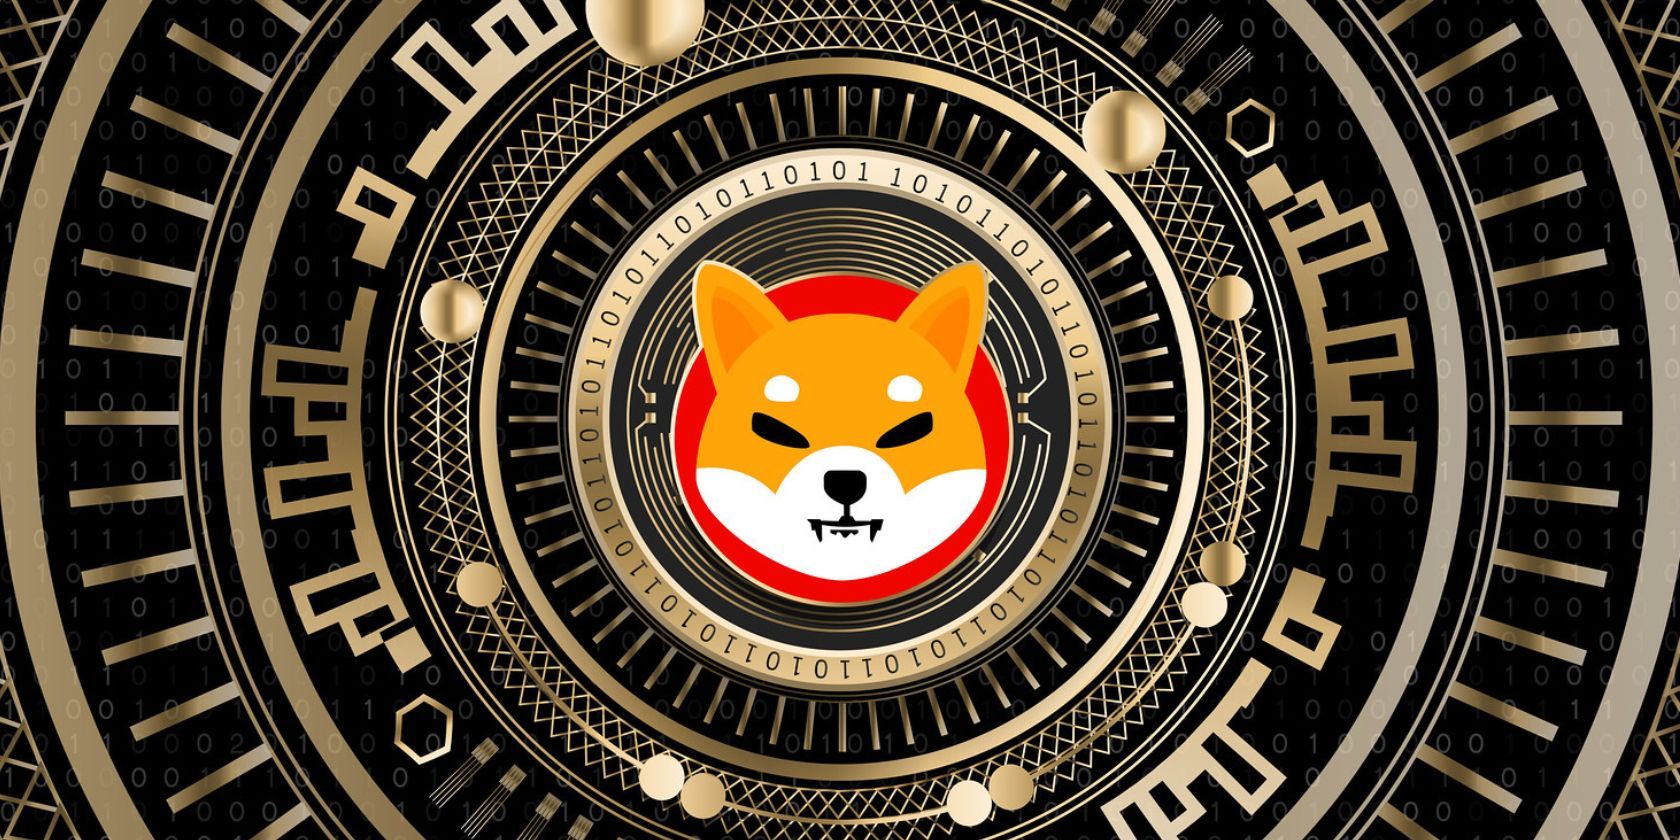 digital graphic of shiba inu logo surrounded by gold and black design